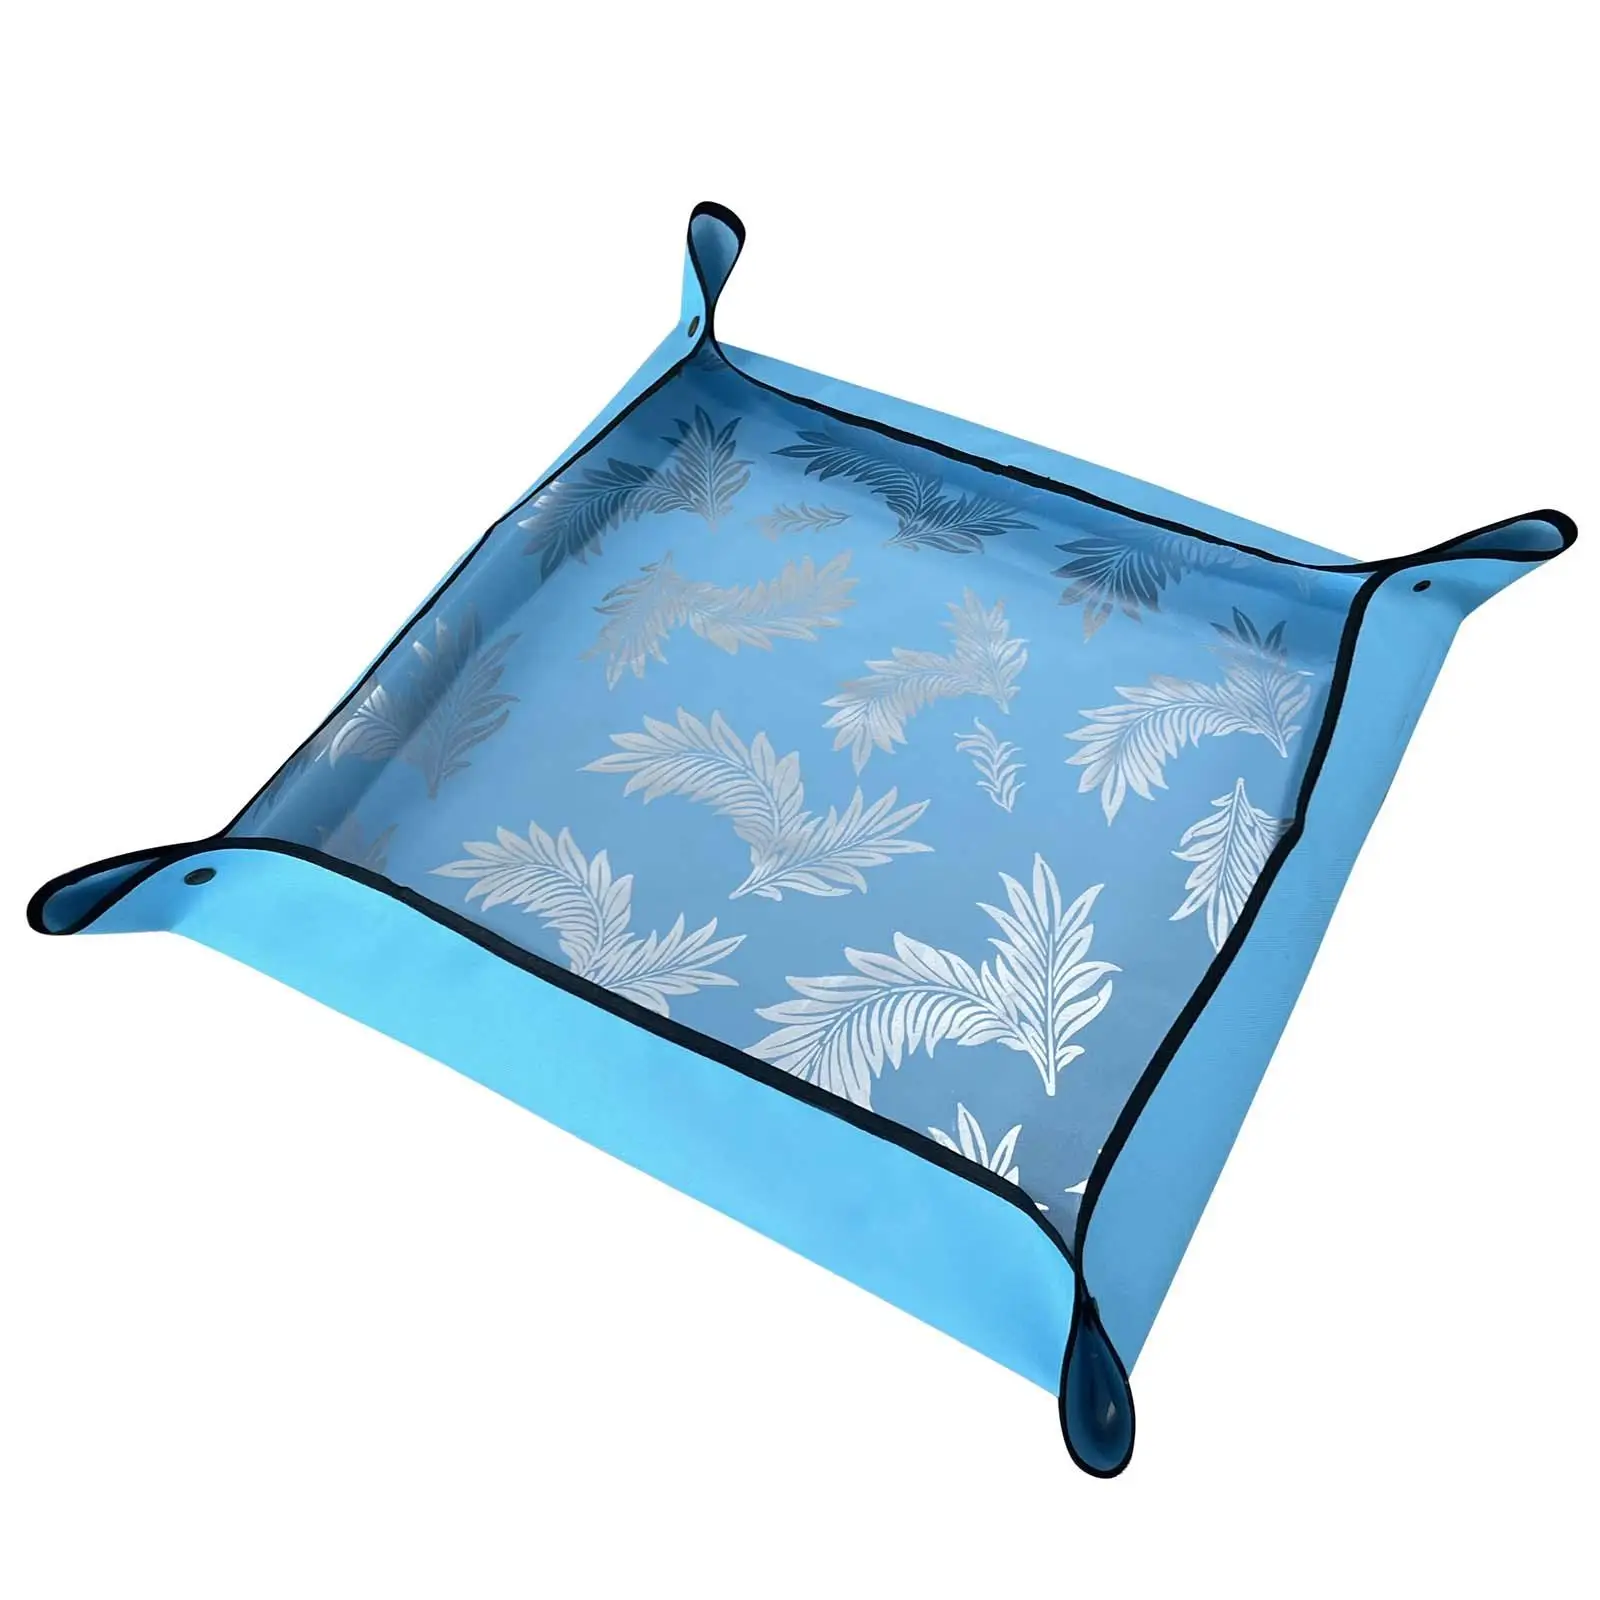 Garden Tray with Buckle Oxford Cloth Waterproof Transplanting Potting Tray for Flower Pot Cleaning Vases Indoor Pruning Outdoor